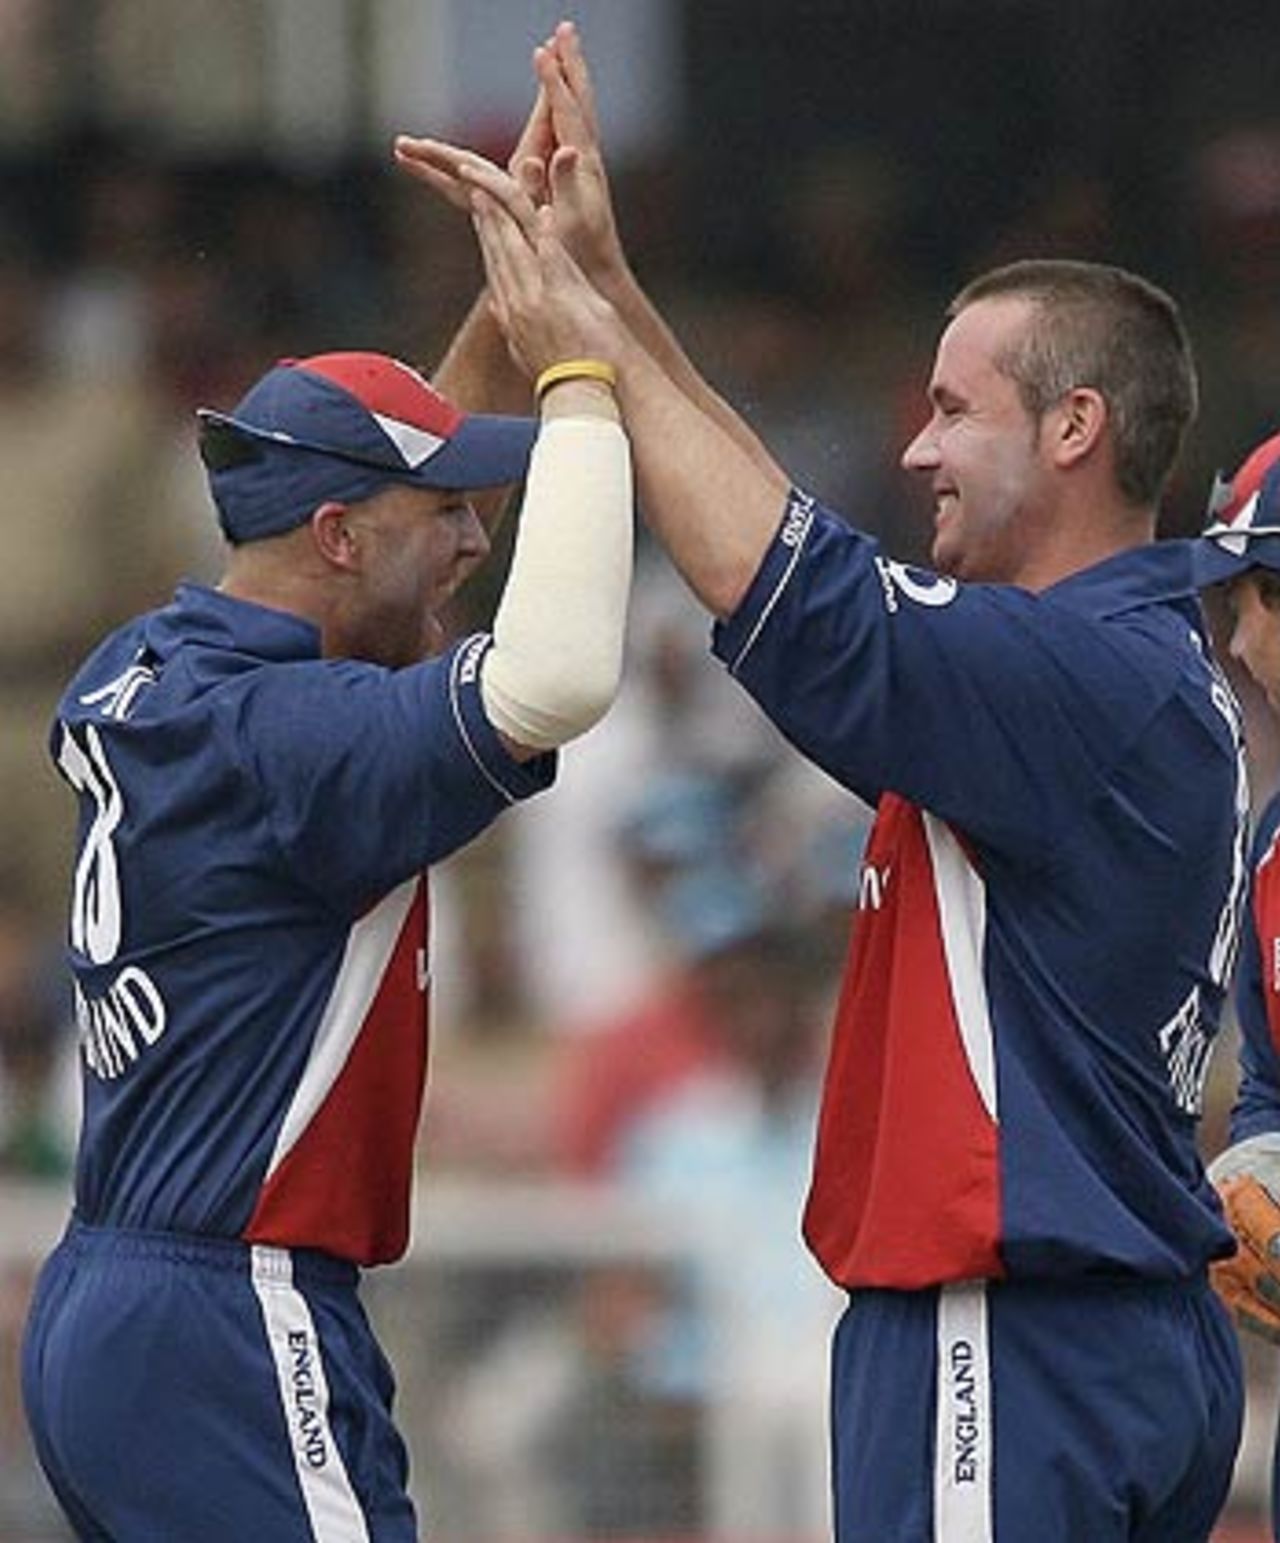 Matt Prior and Ian Blackwell celebrate the wicket of Virender Sehwag, India v England, 2nd ODI, Faridabad, March 31, 2006